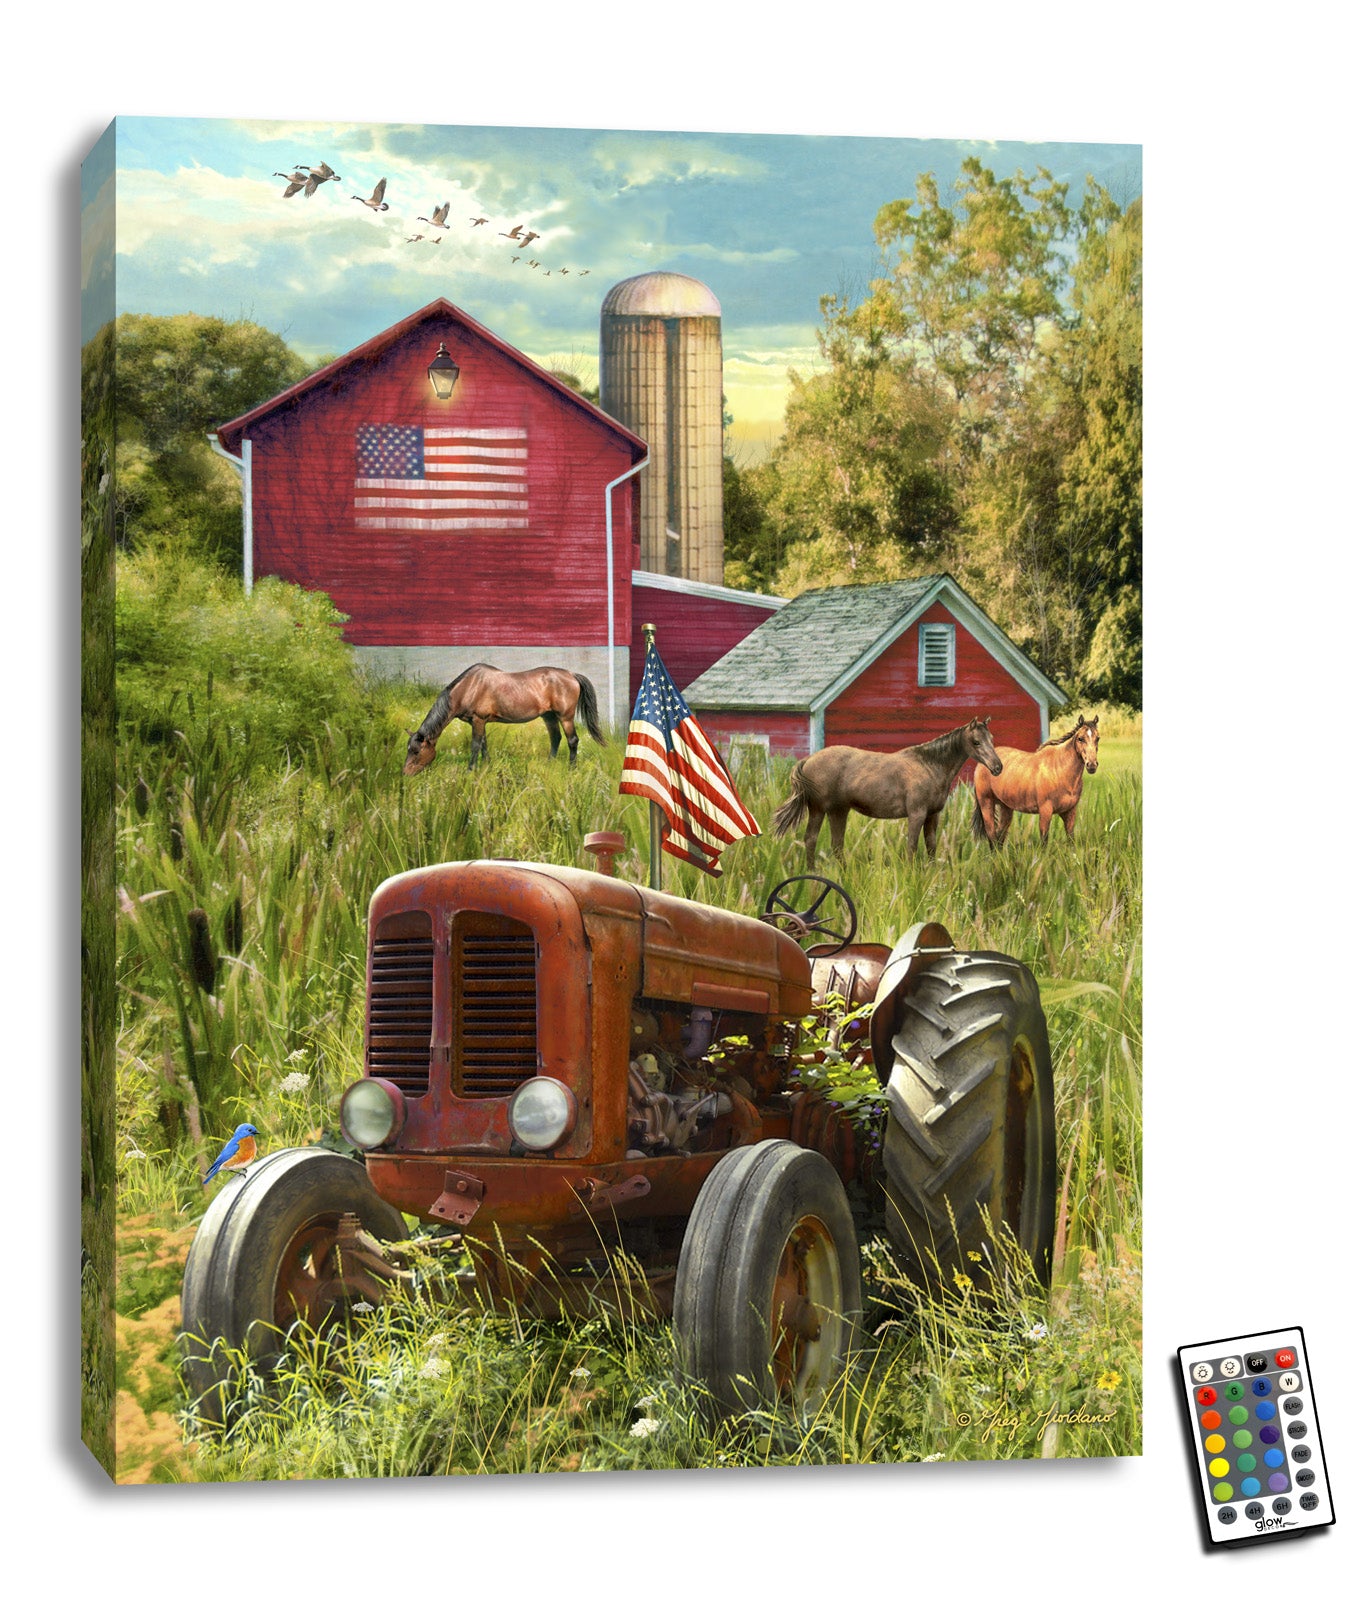  Featuring a beautiful image of a tractor sitting in a vast green field, with an American flag waving proudly on it, this wall art is the perfect addition to your home decor.  As you gaze at the image, you'll also notice three majestic horses grazing in the background, while a red barn with an American flag painted on it stands tall and proud.